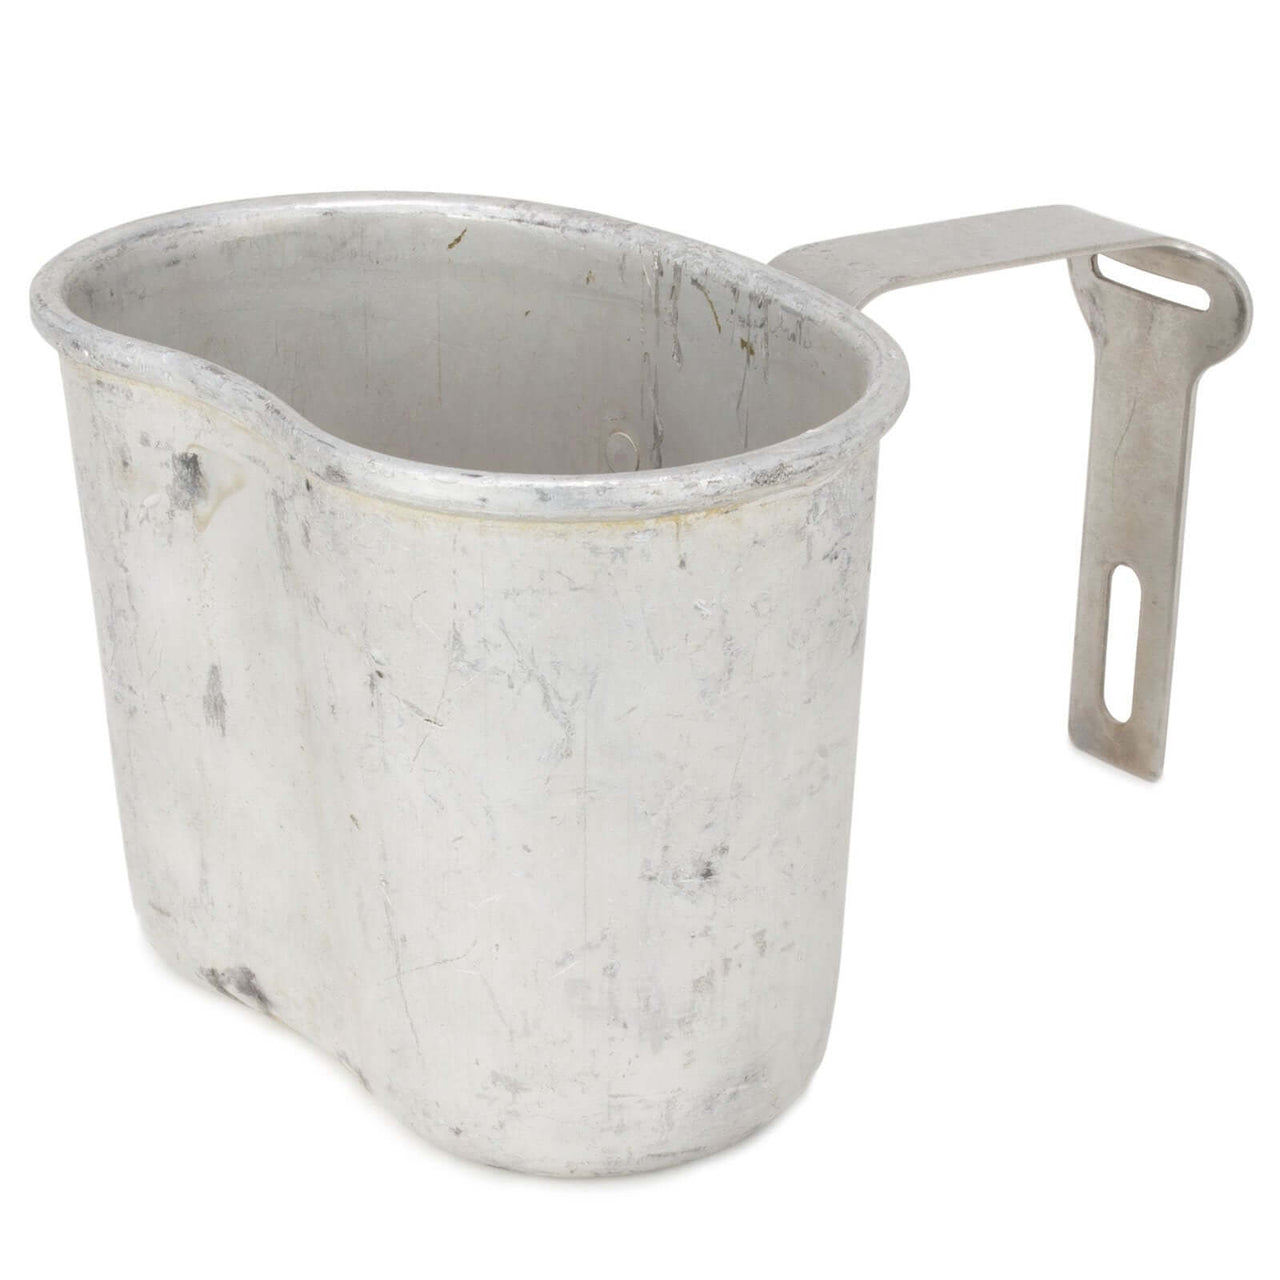 Authentic Belgian Army Canteen Cup (Used)